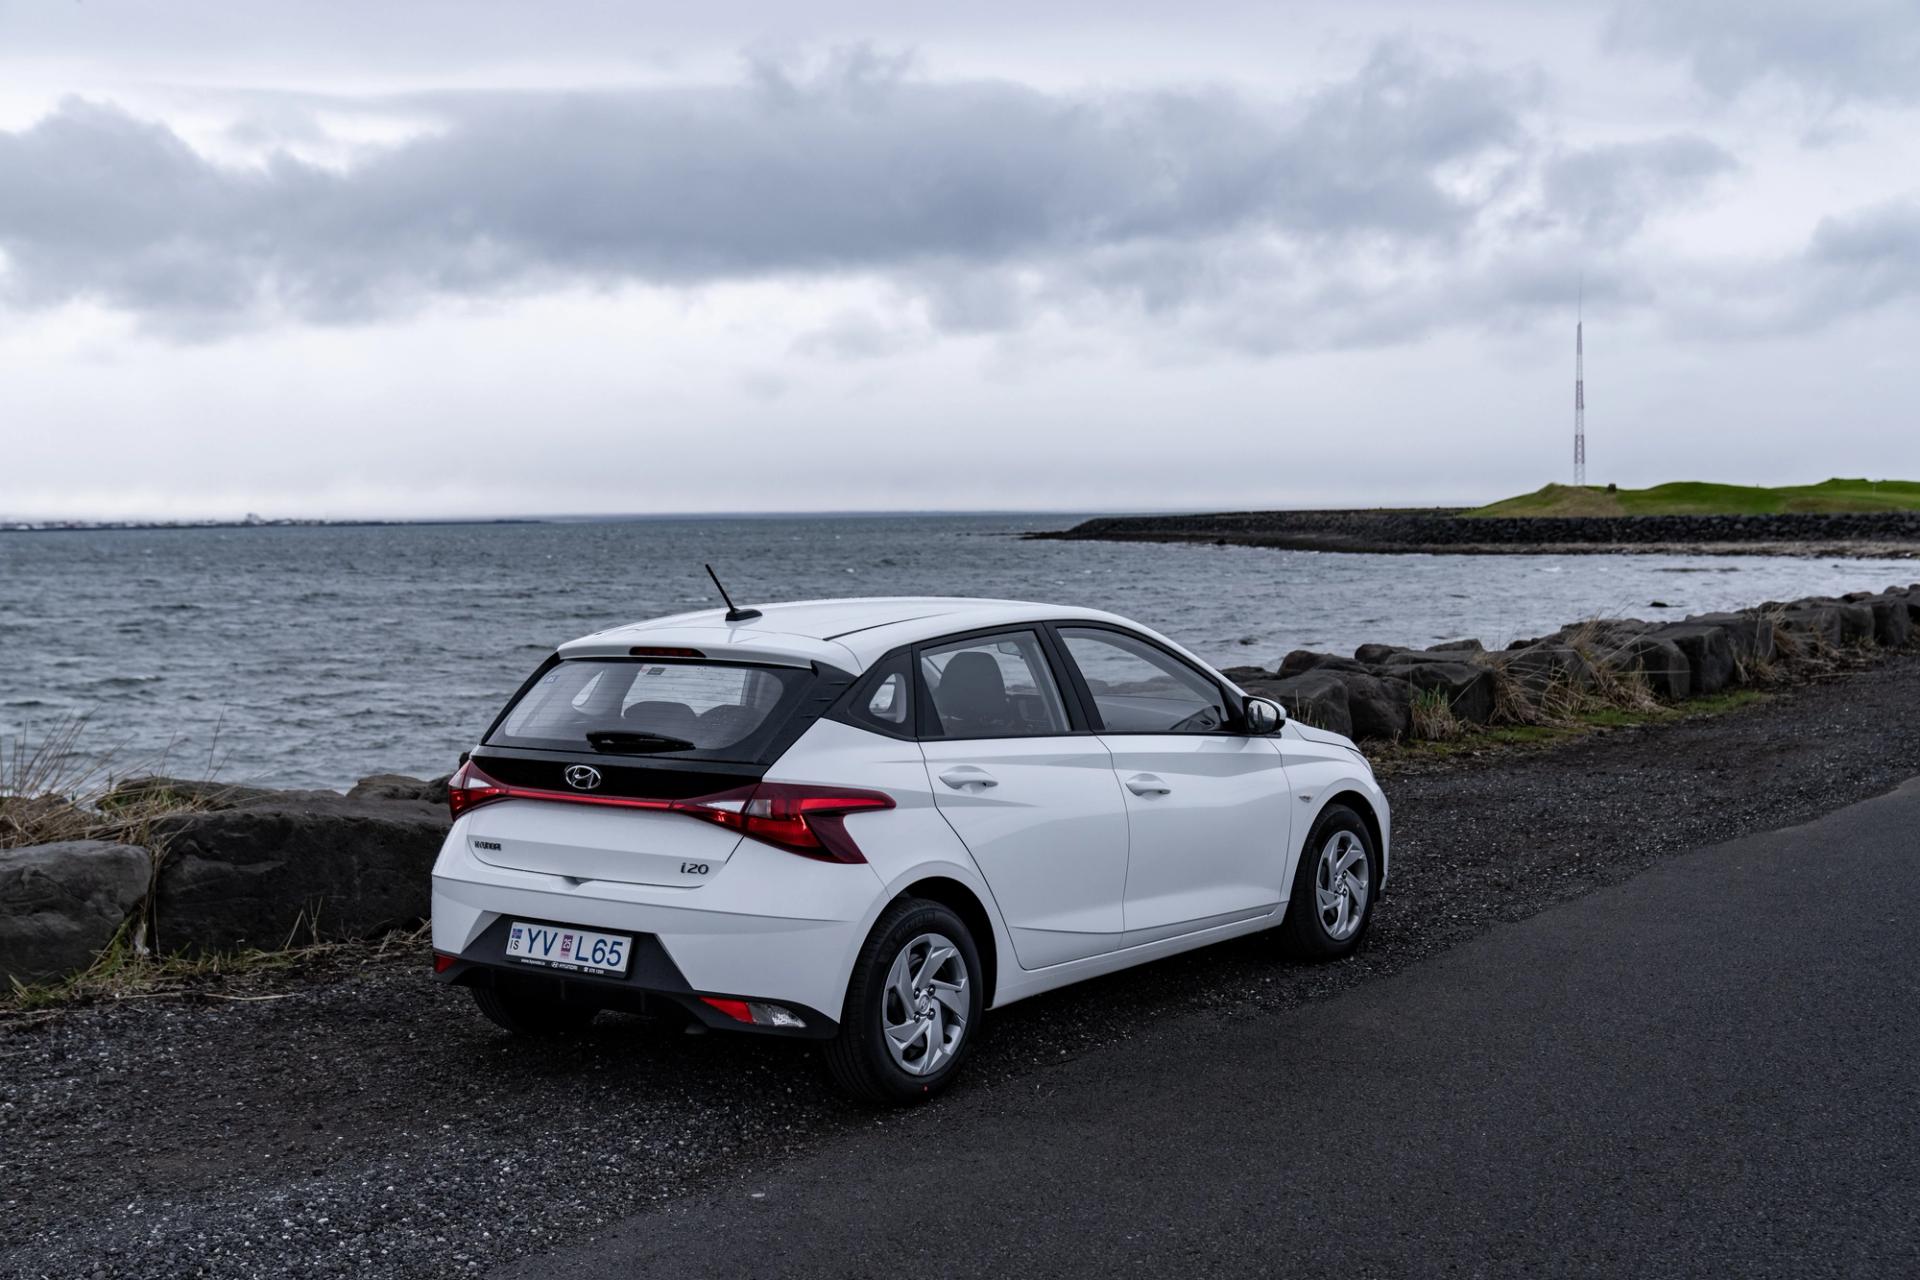 White Hyundai i20 rental car parked by the seaside in Iceland.